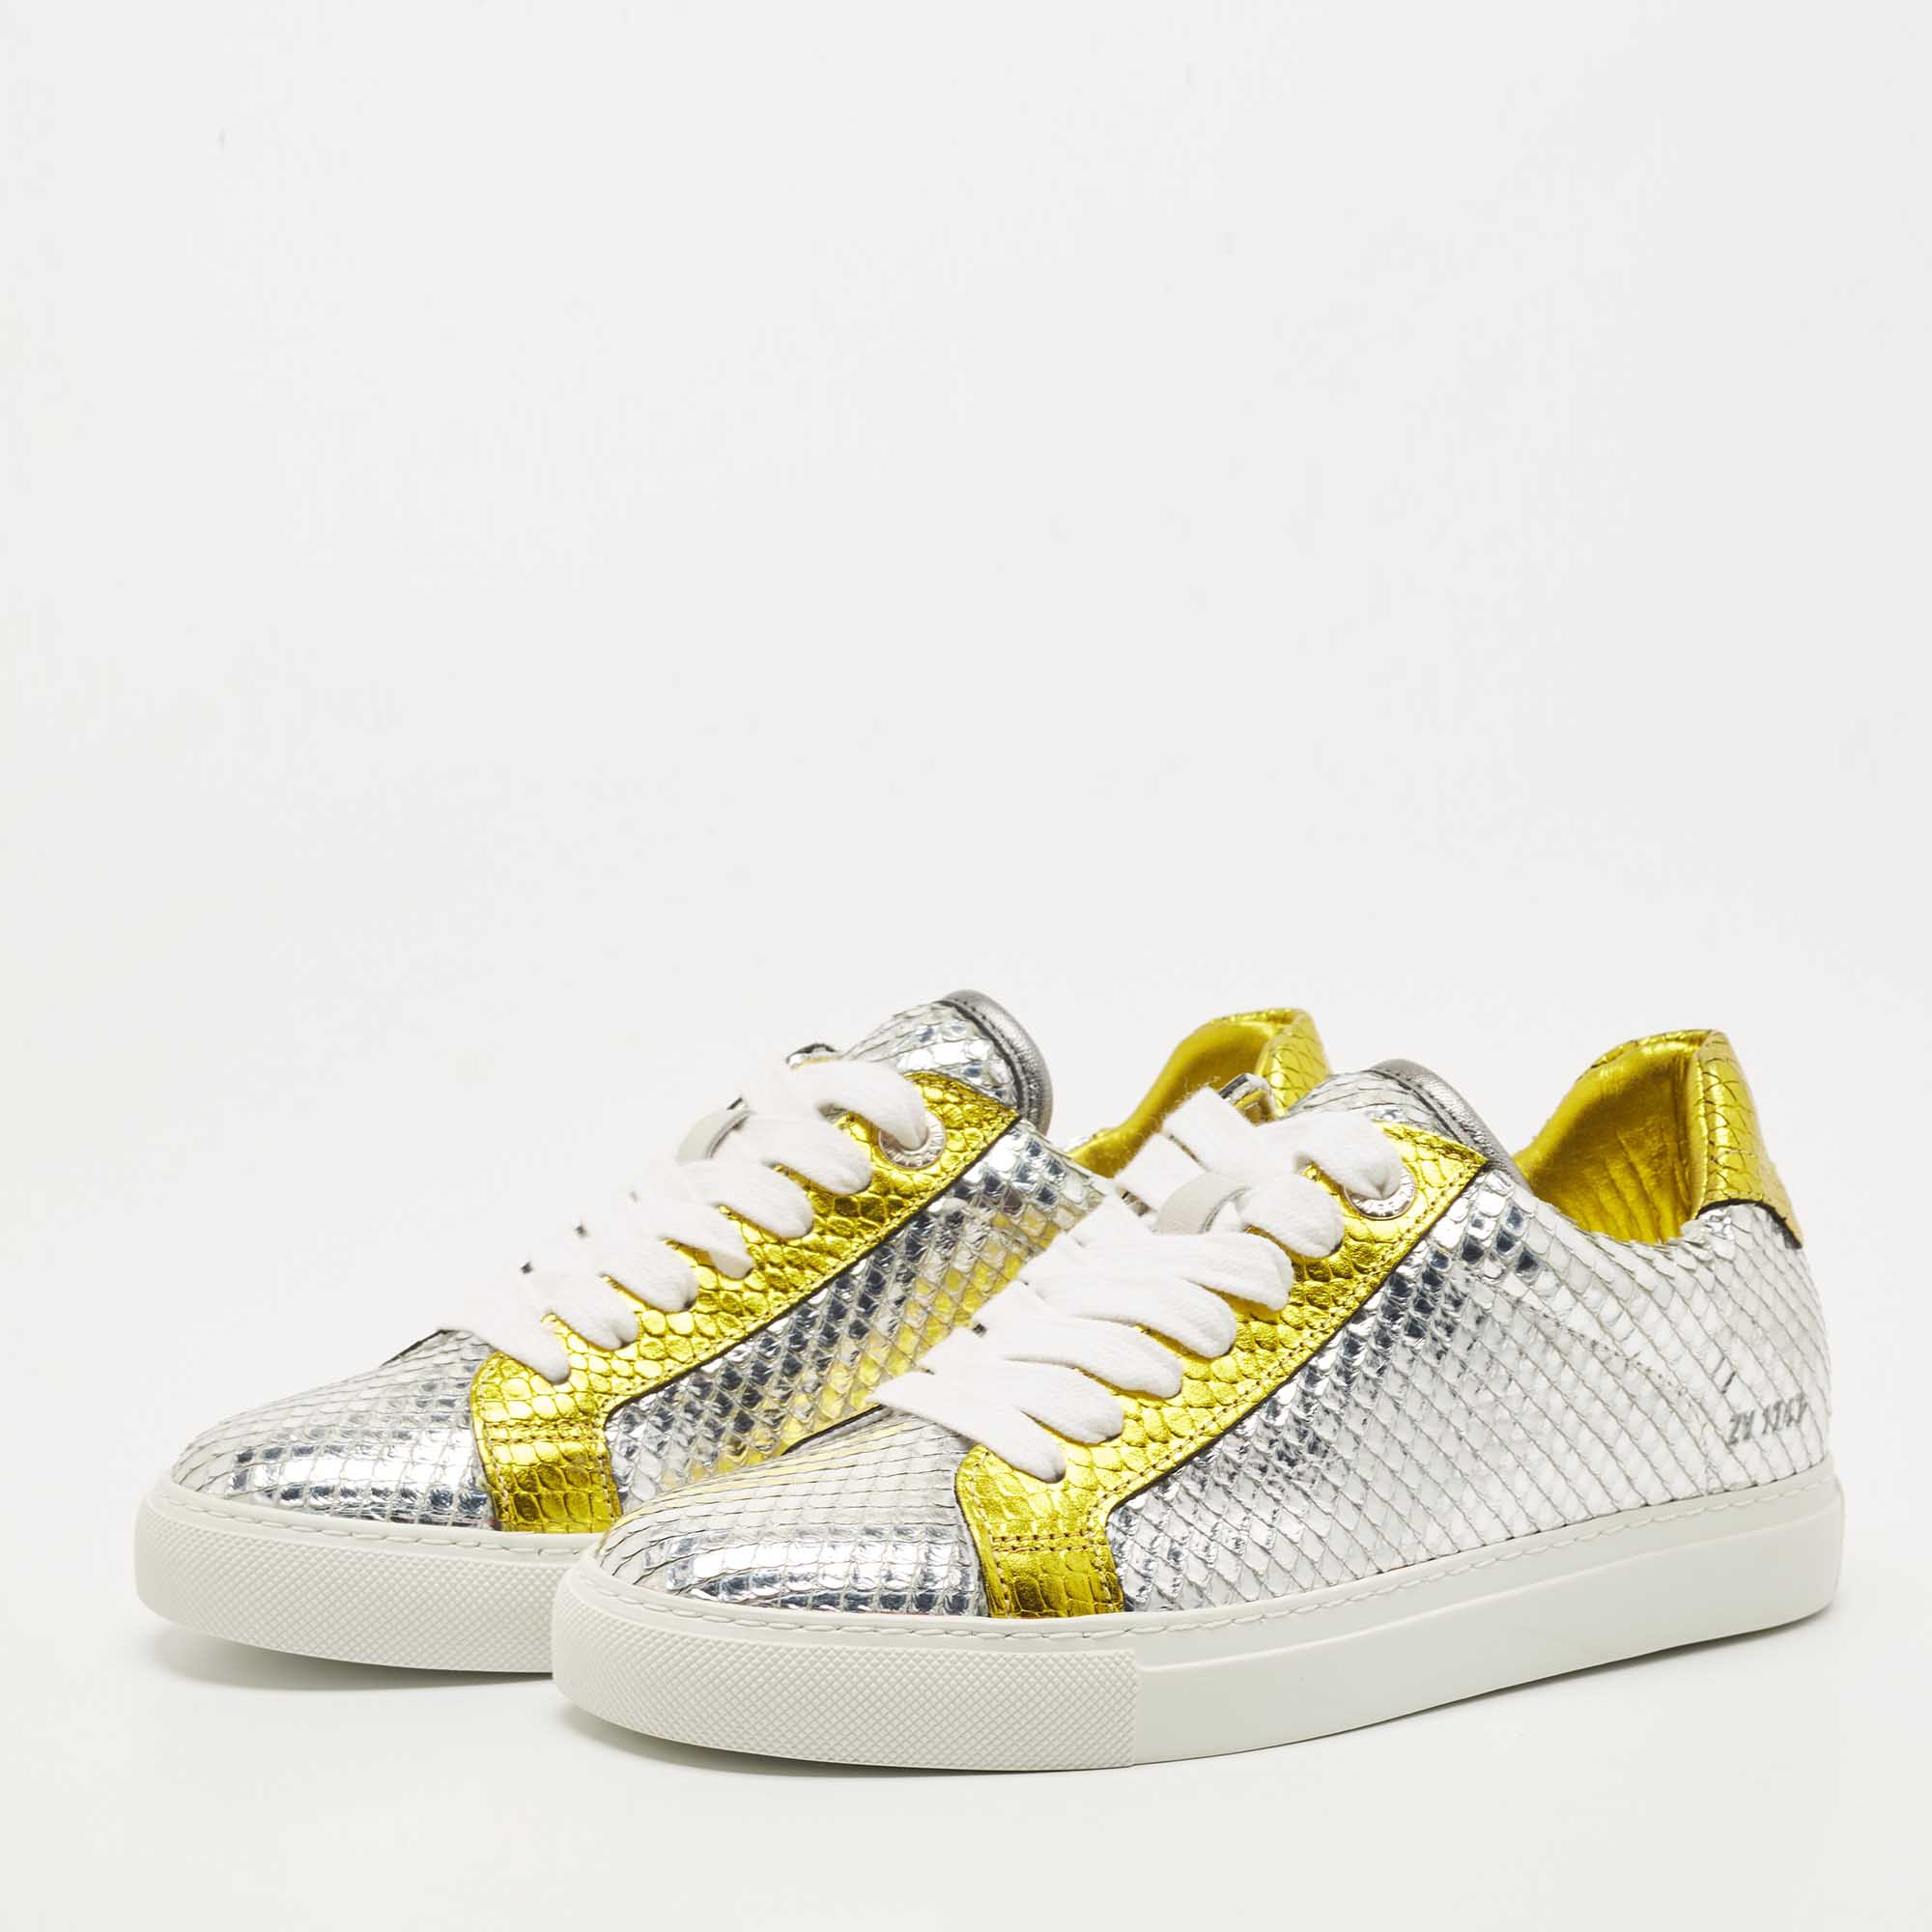 

Zadig & Voltaire Silver/Gold Python Embossed Leather Low Top Sneakers Size